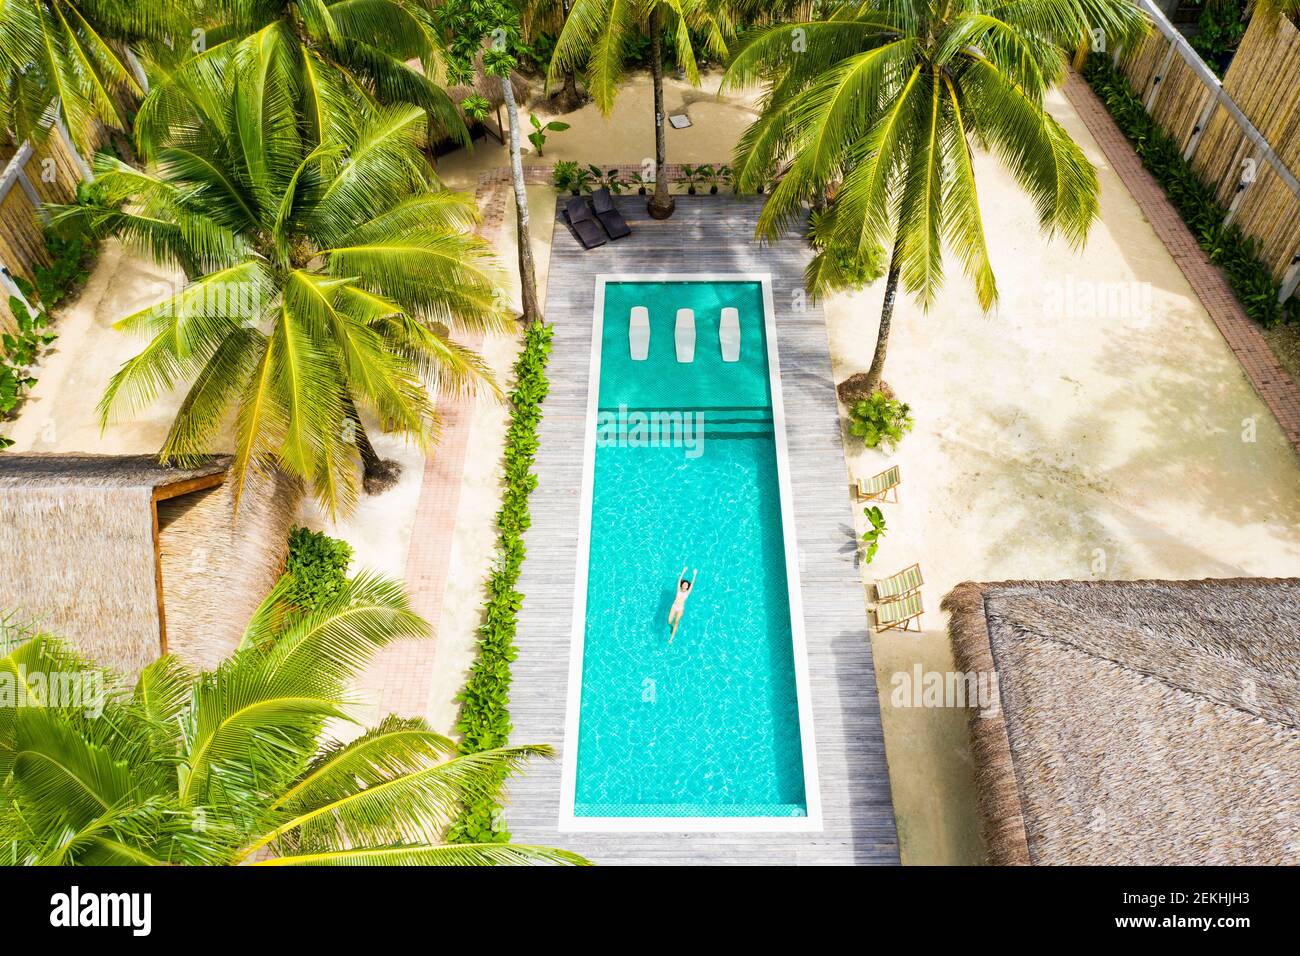 Aerial view of a girl swimming in a pool during the Covid-19 outbreak. Stock Photo